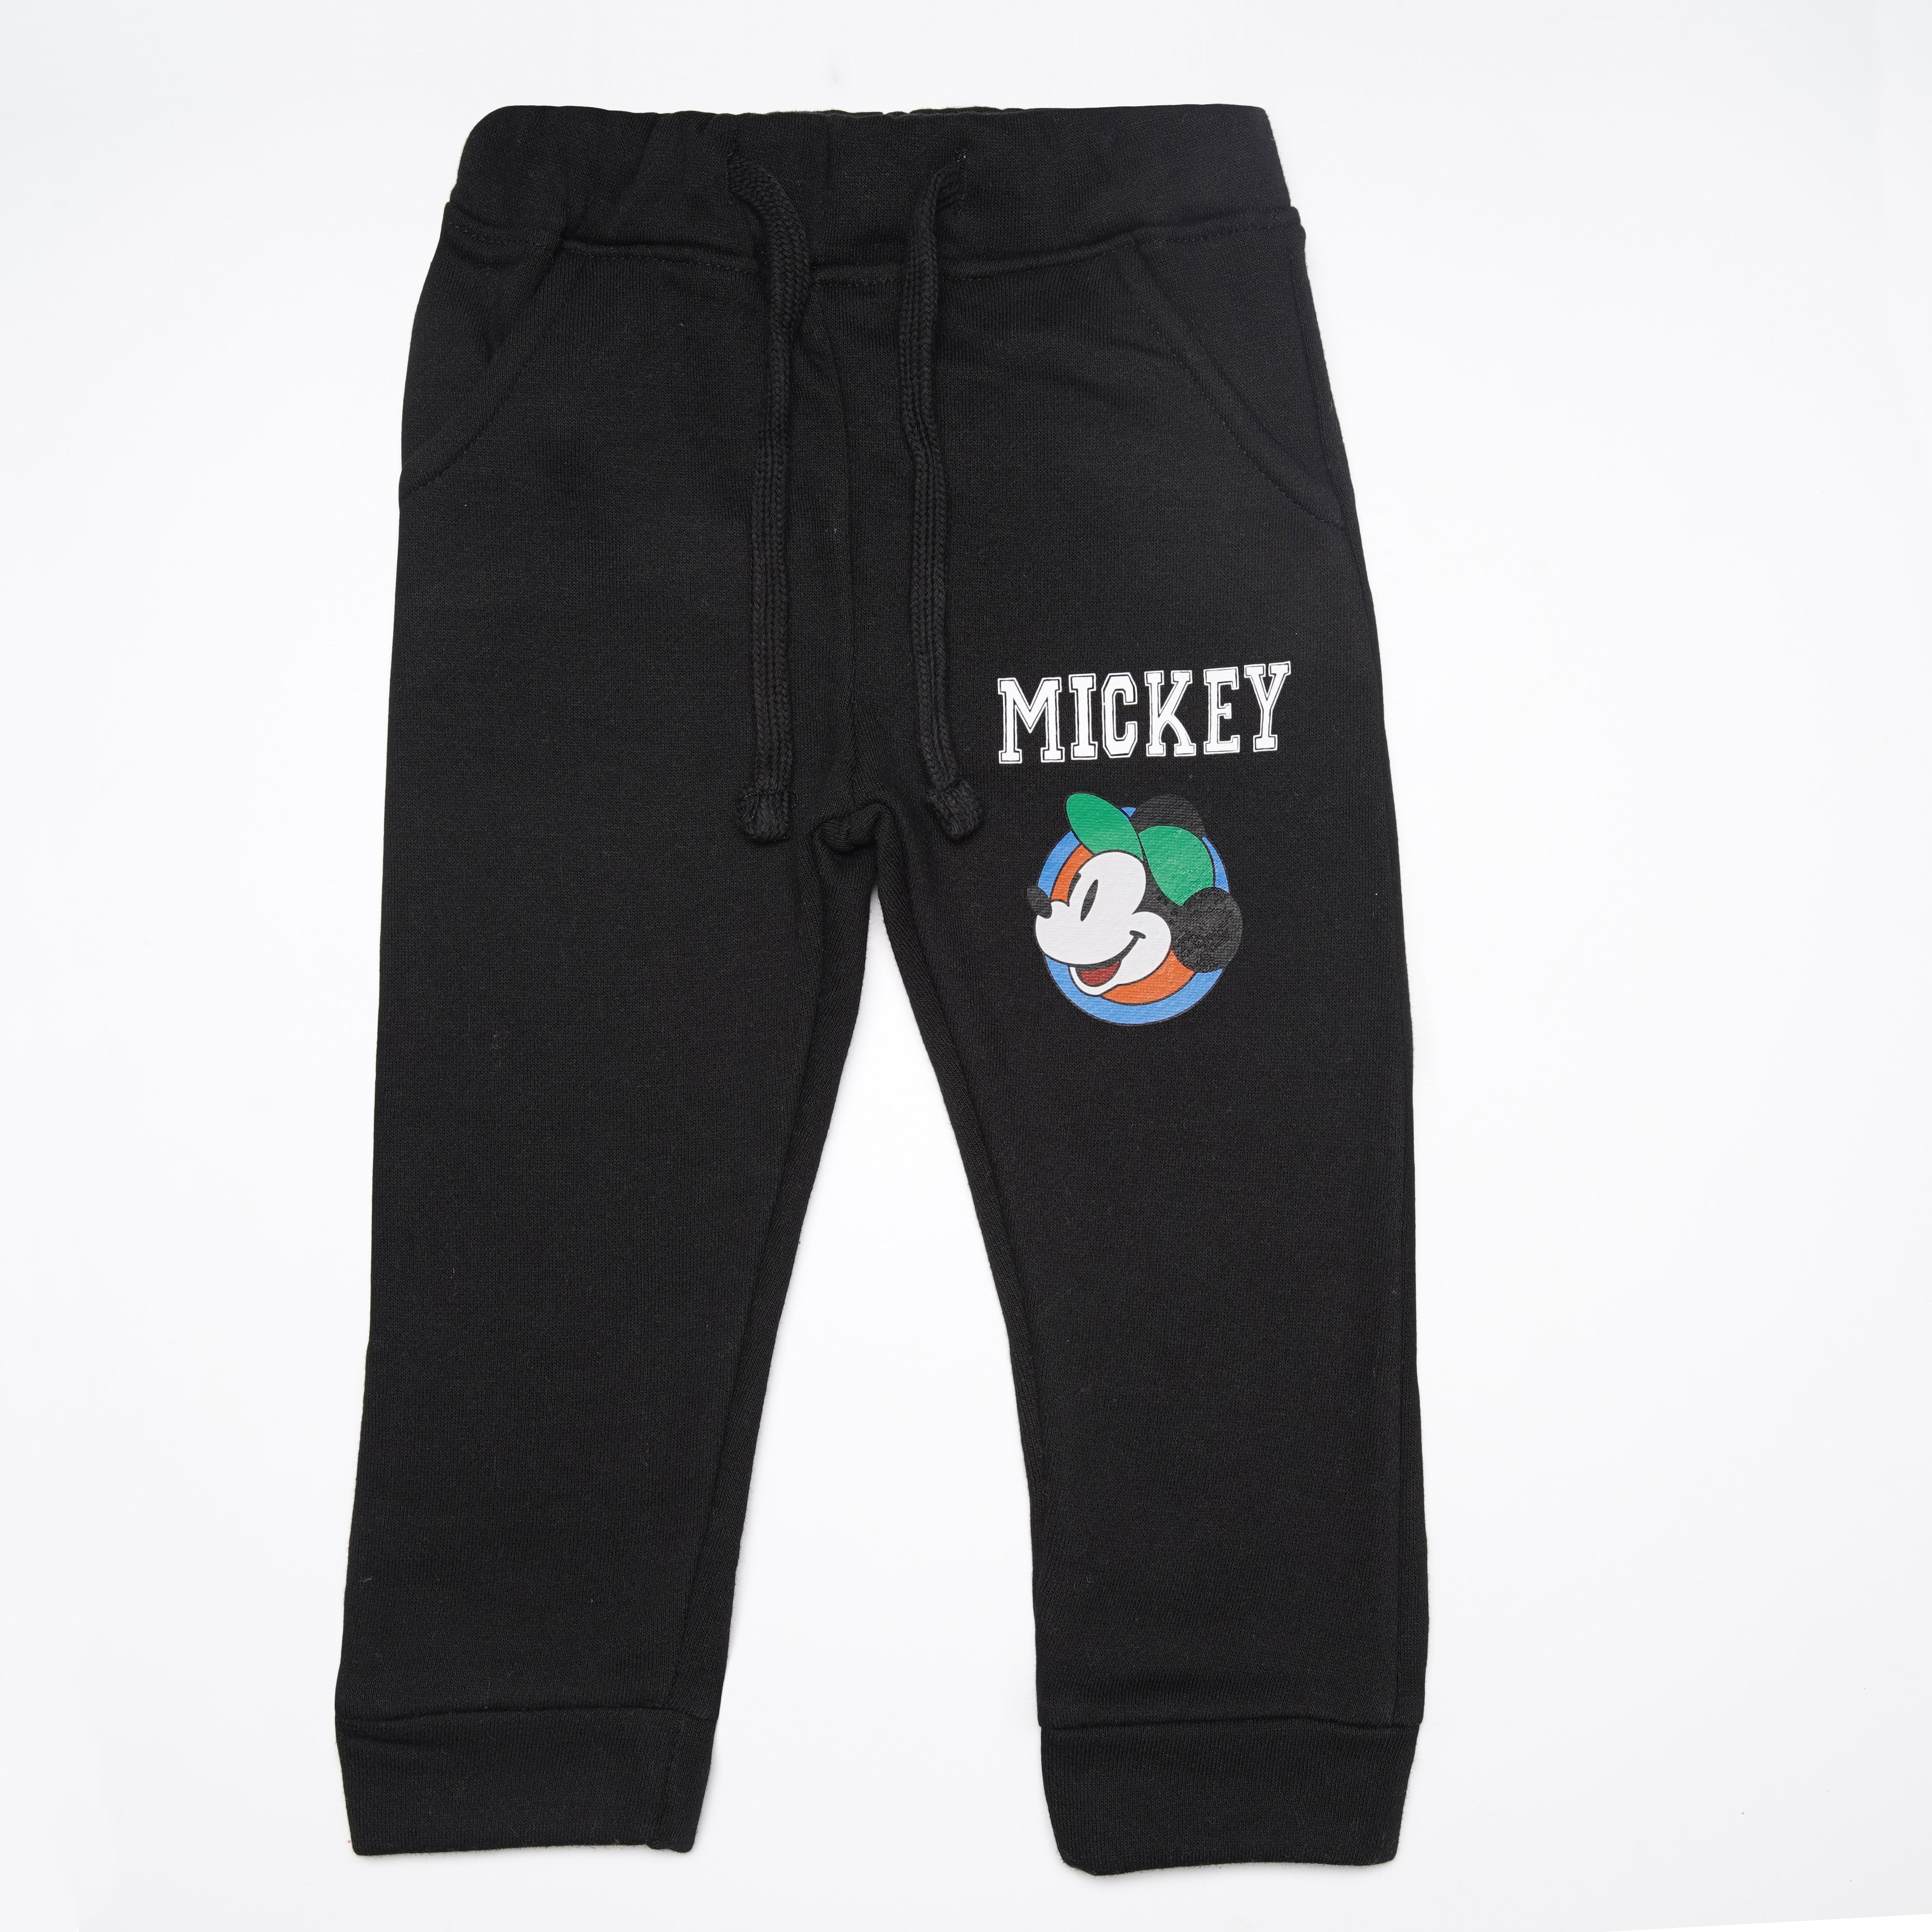 Infant Baba Trouser (Mickey)